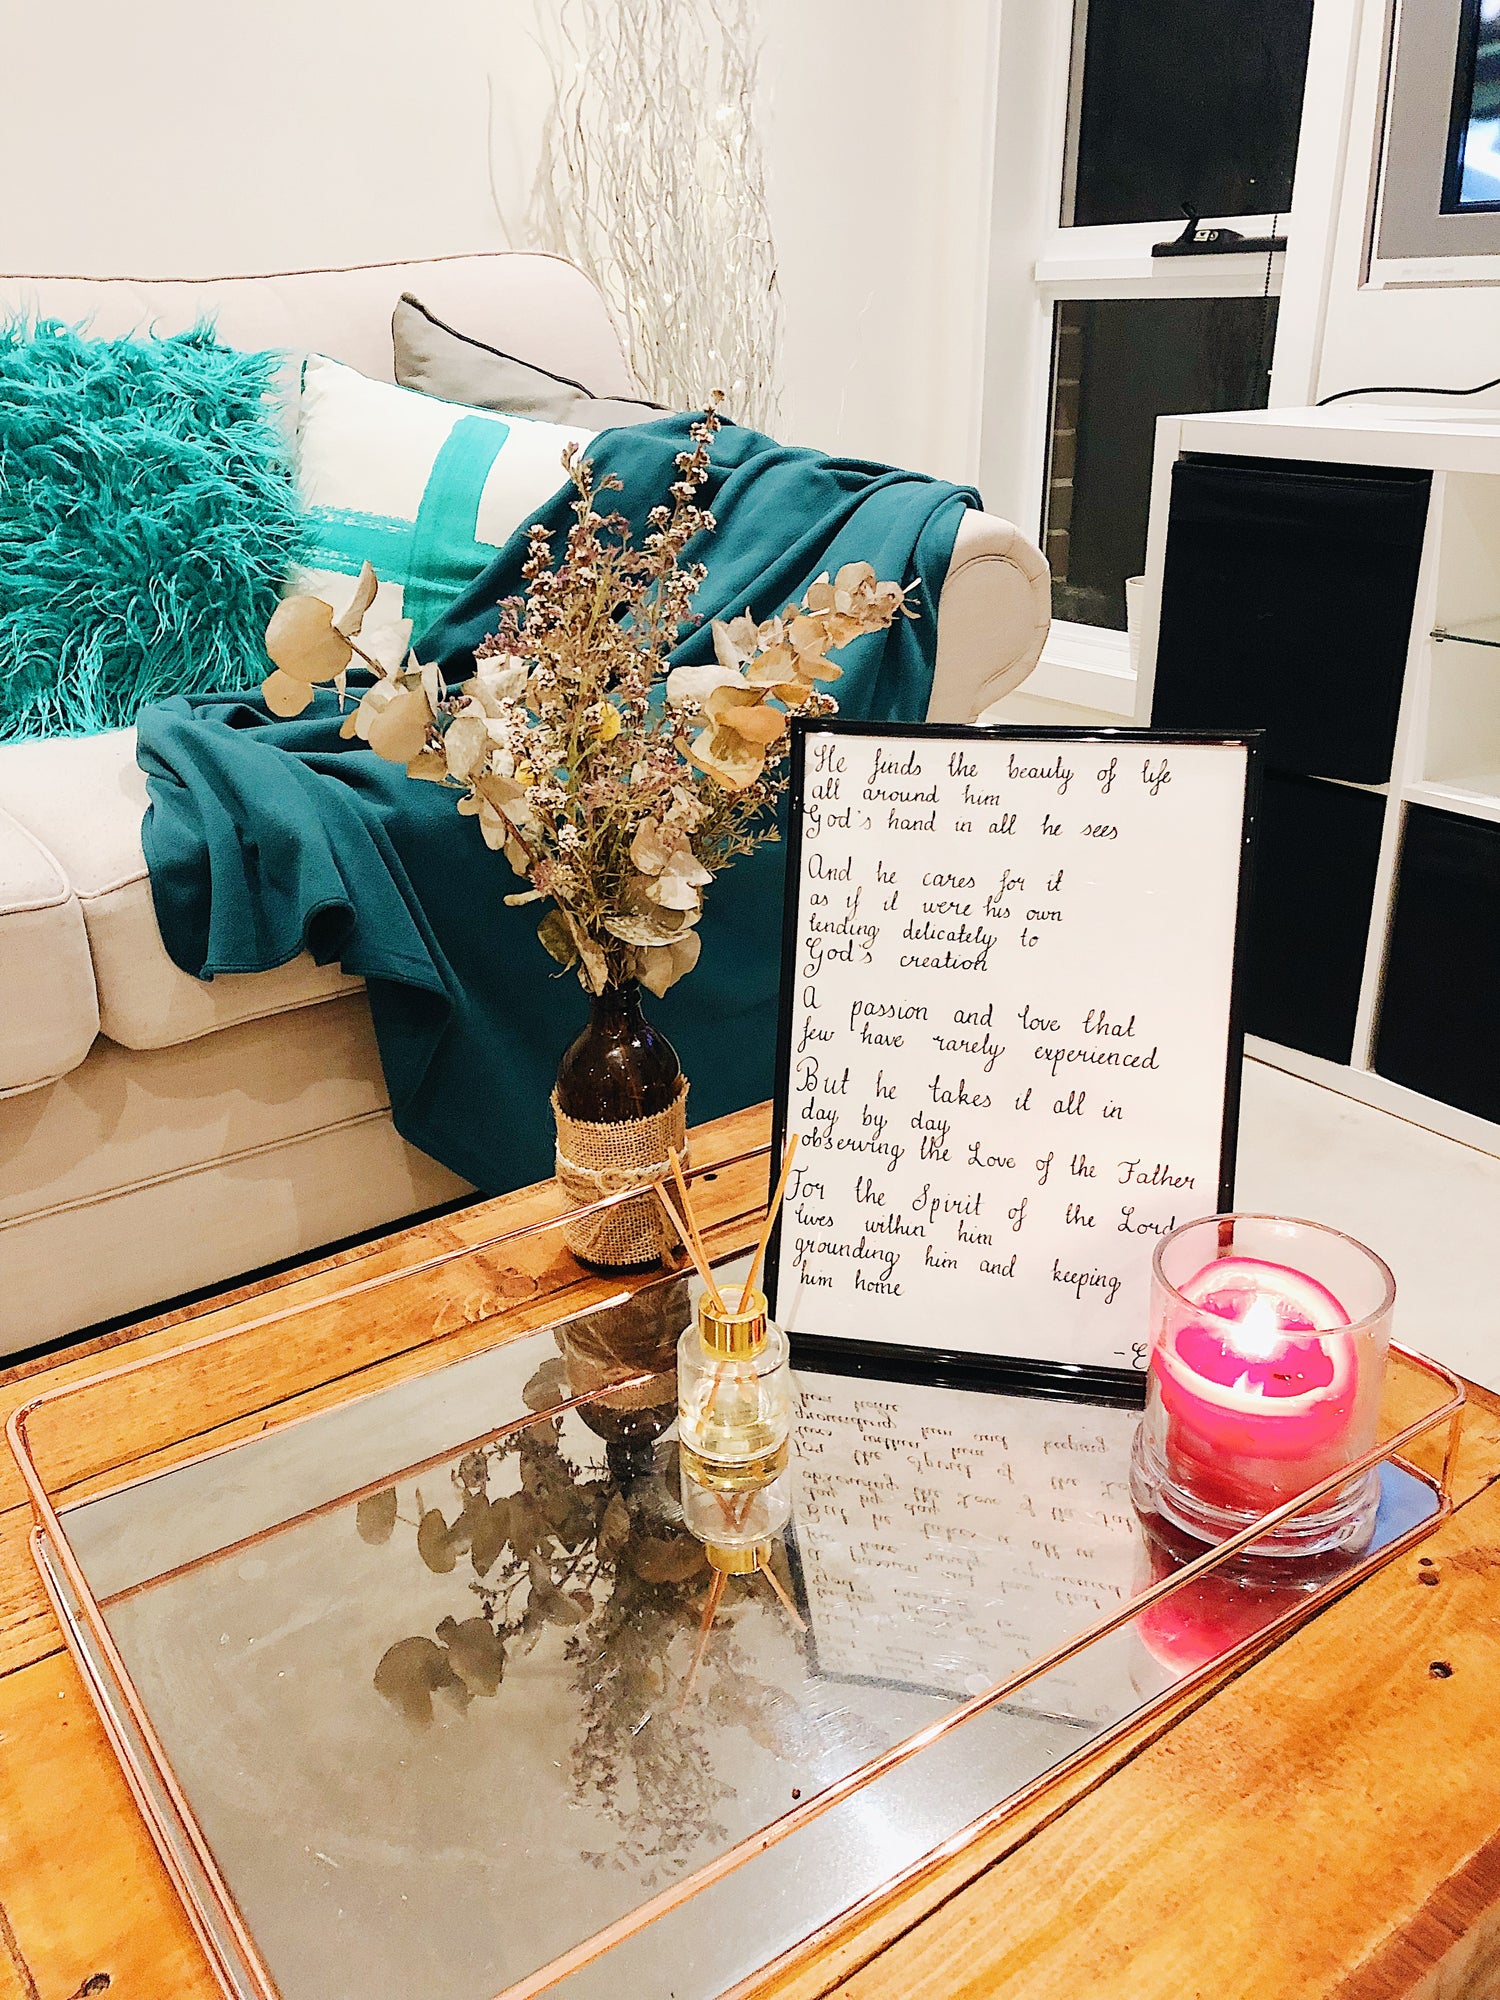 prophetic poem on coffee table, candle in foreground, plant in background, relaxing environment